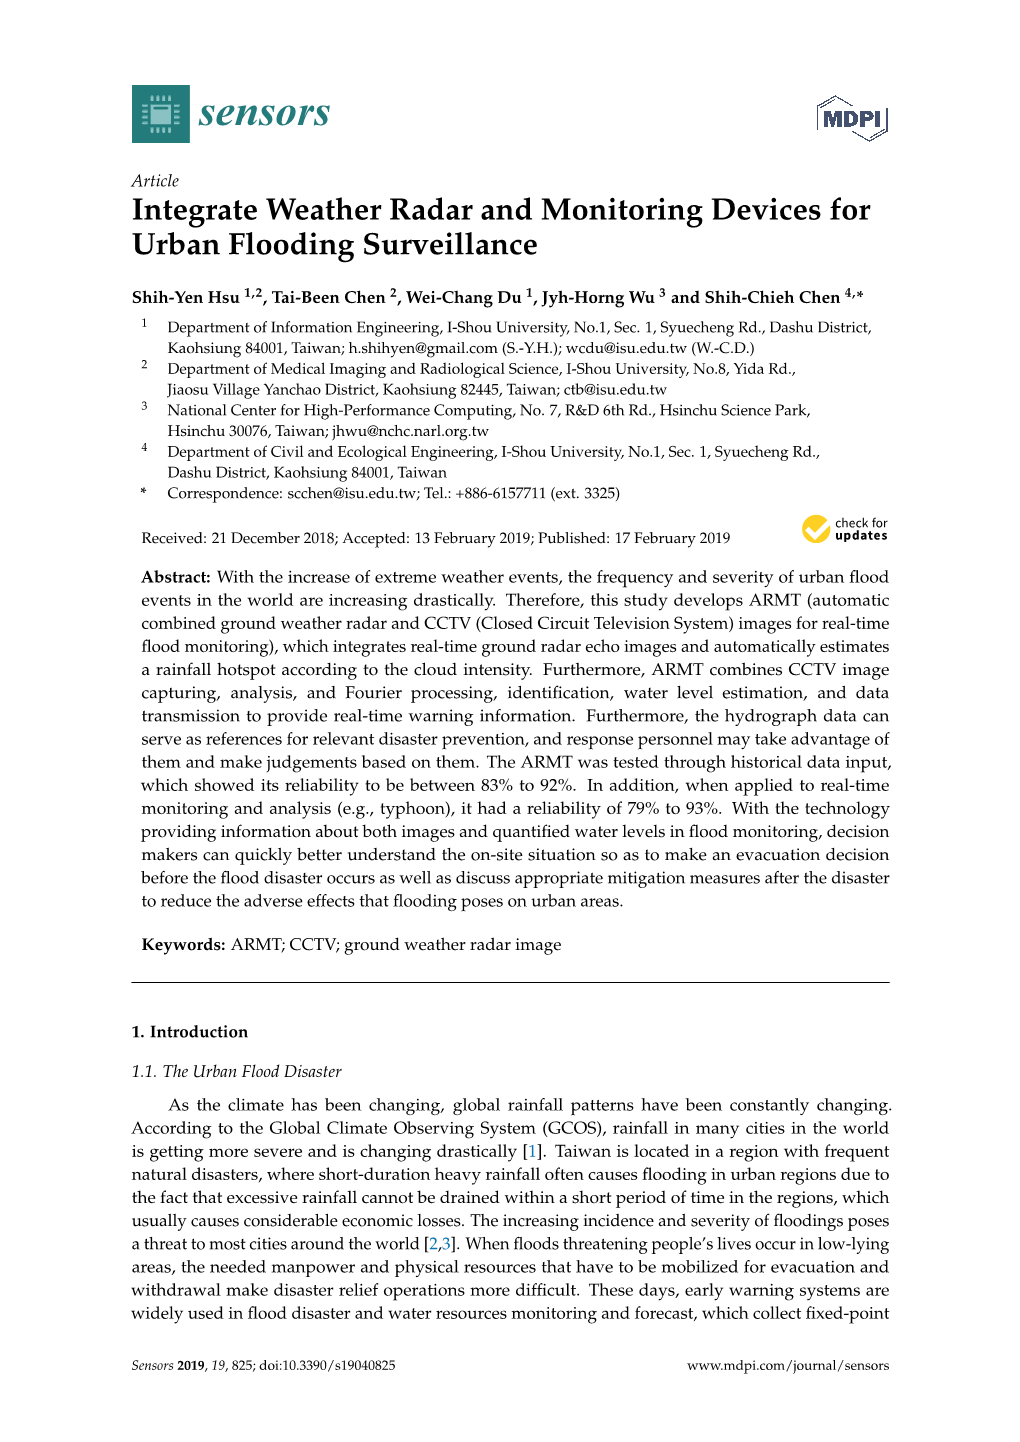 Integrate Weather Radar and Monitoring Devices for Urban Flooding Surveillance